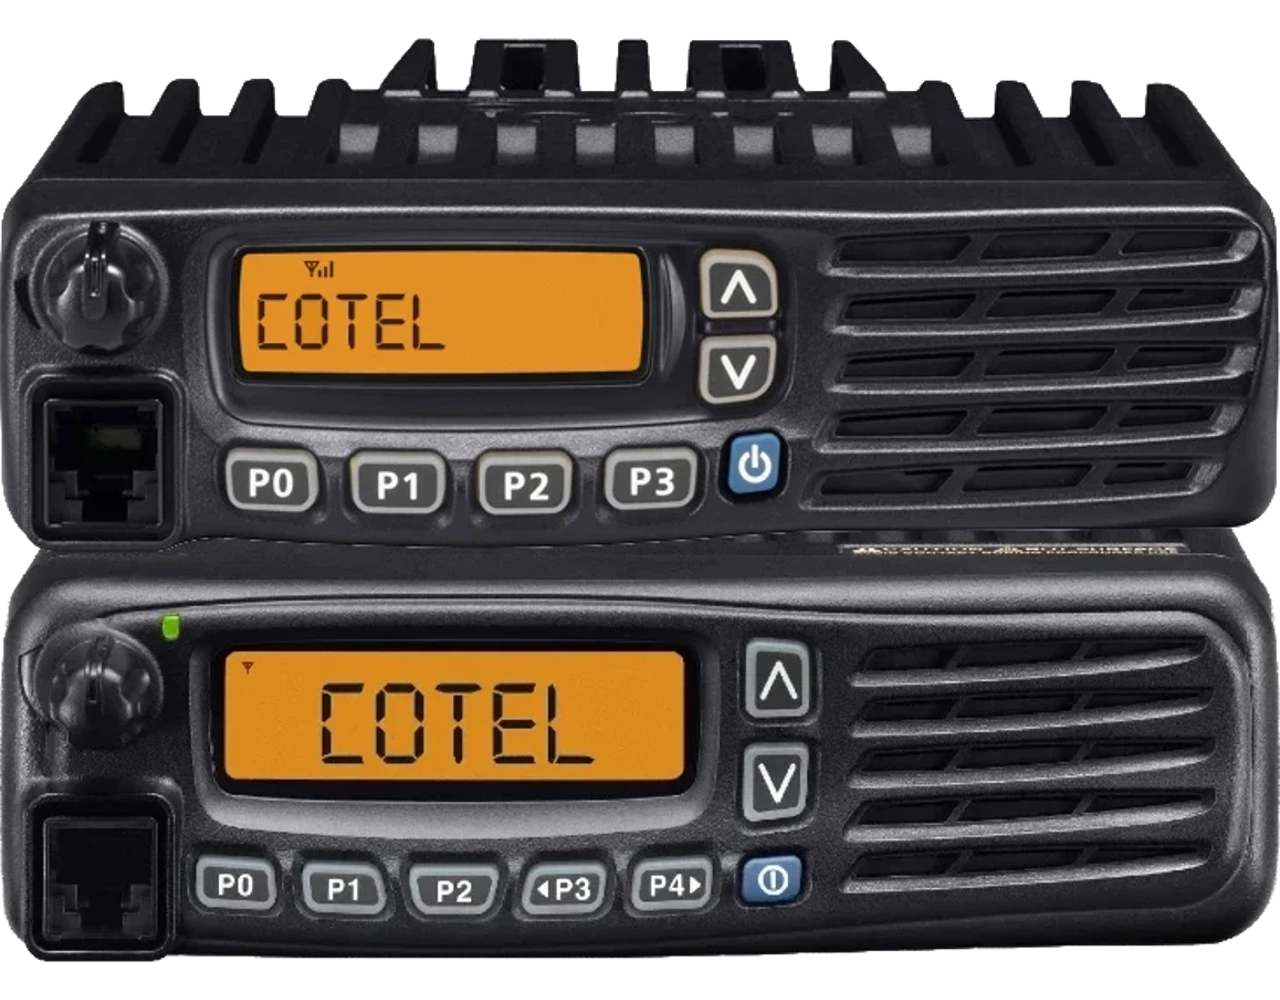 The Cotel radio solution enables all departments to communicate and join resources to deal with a range of possible incidents.